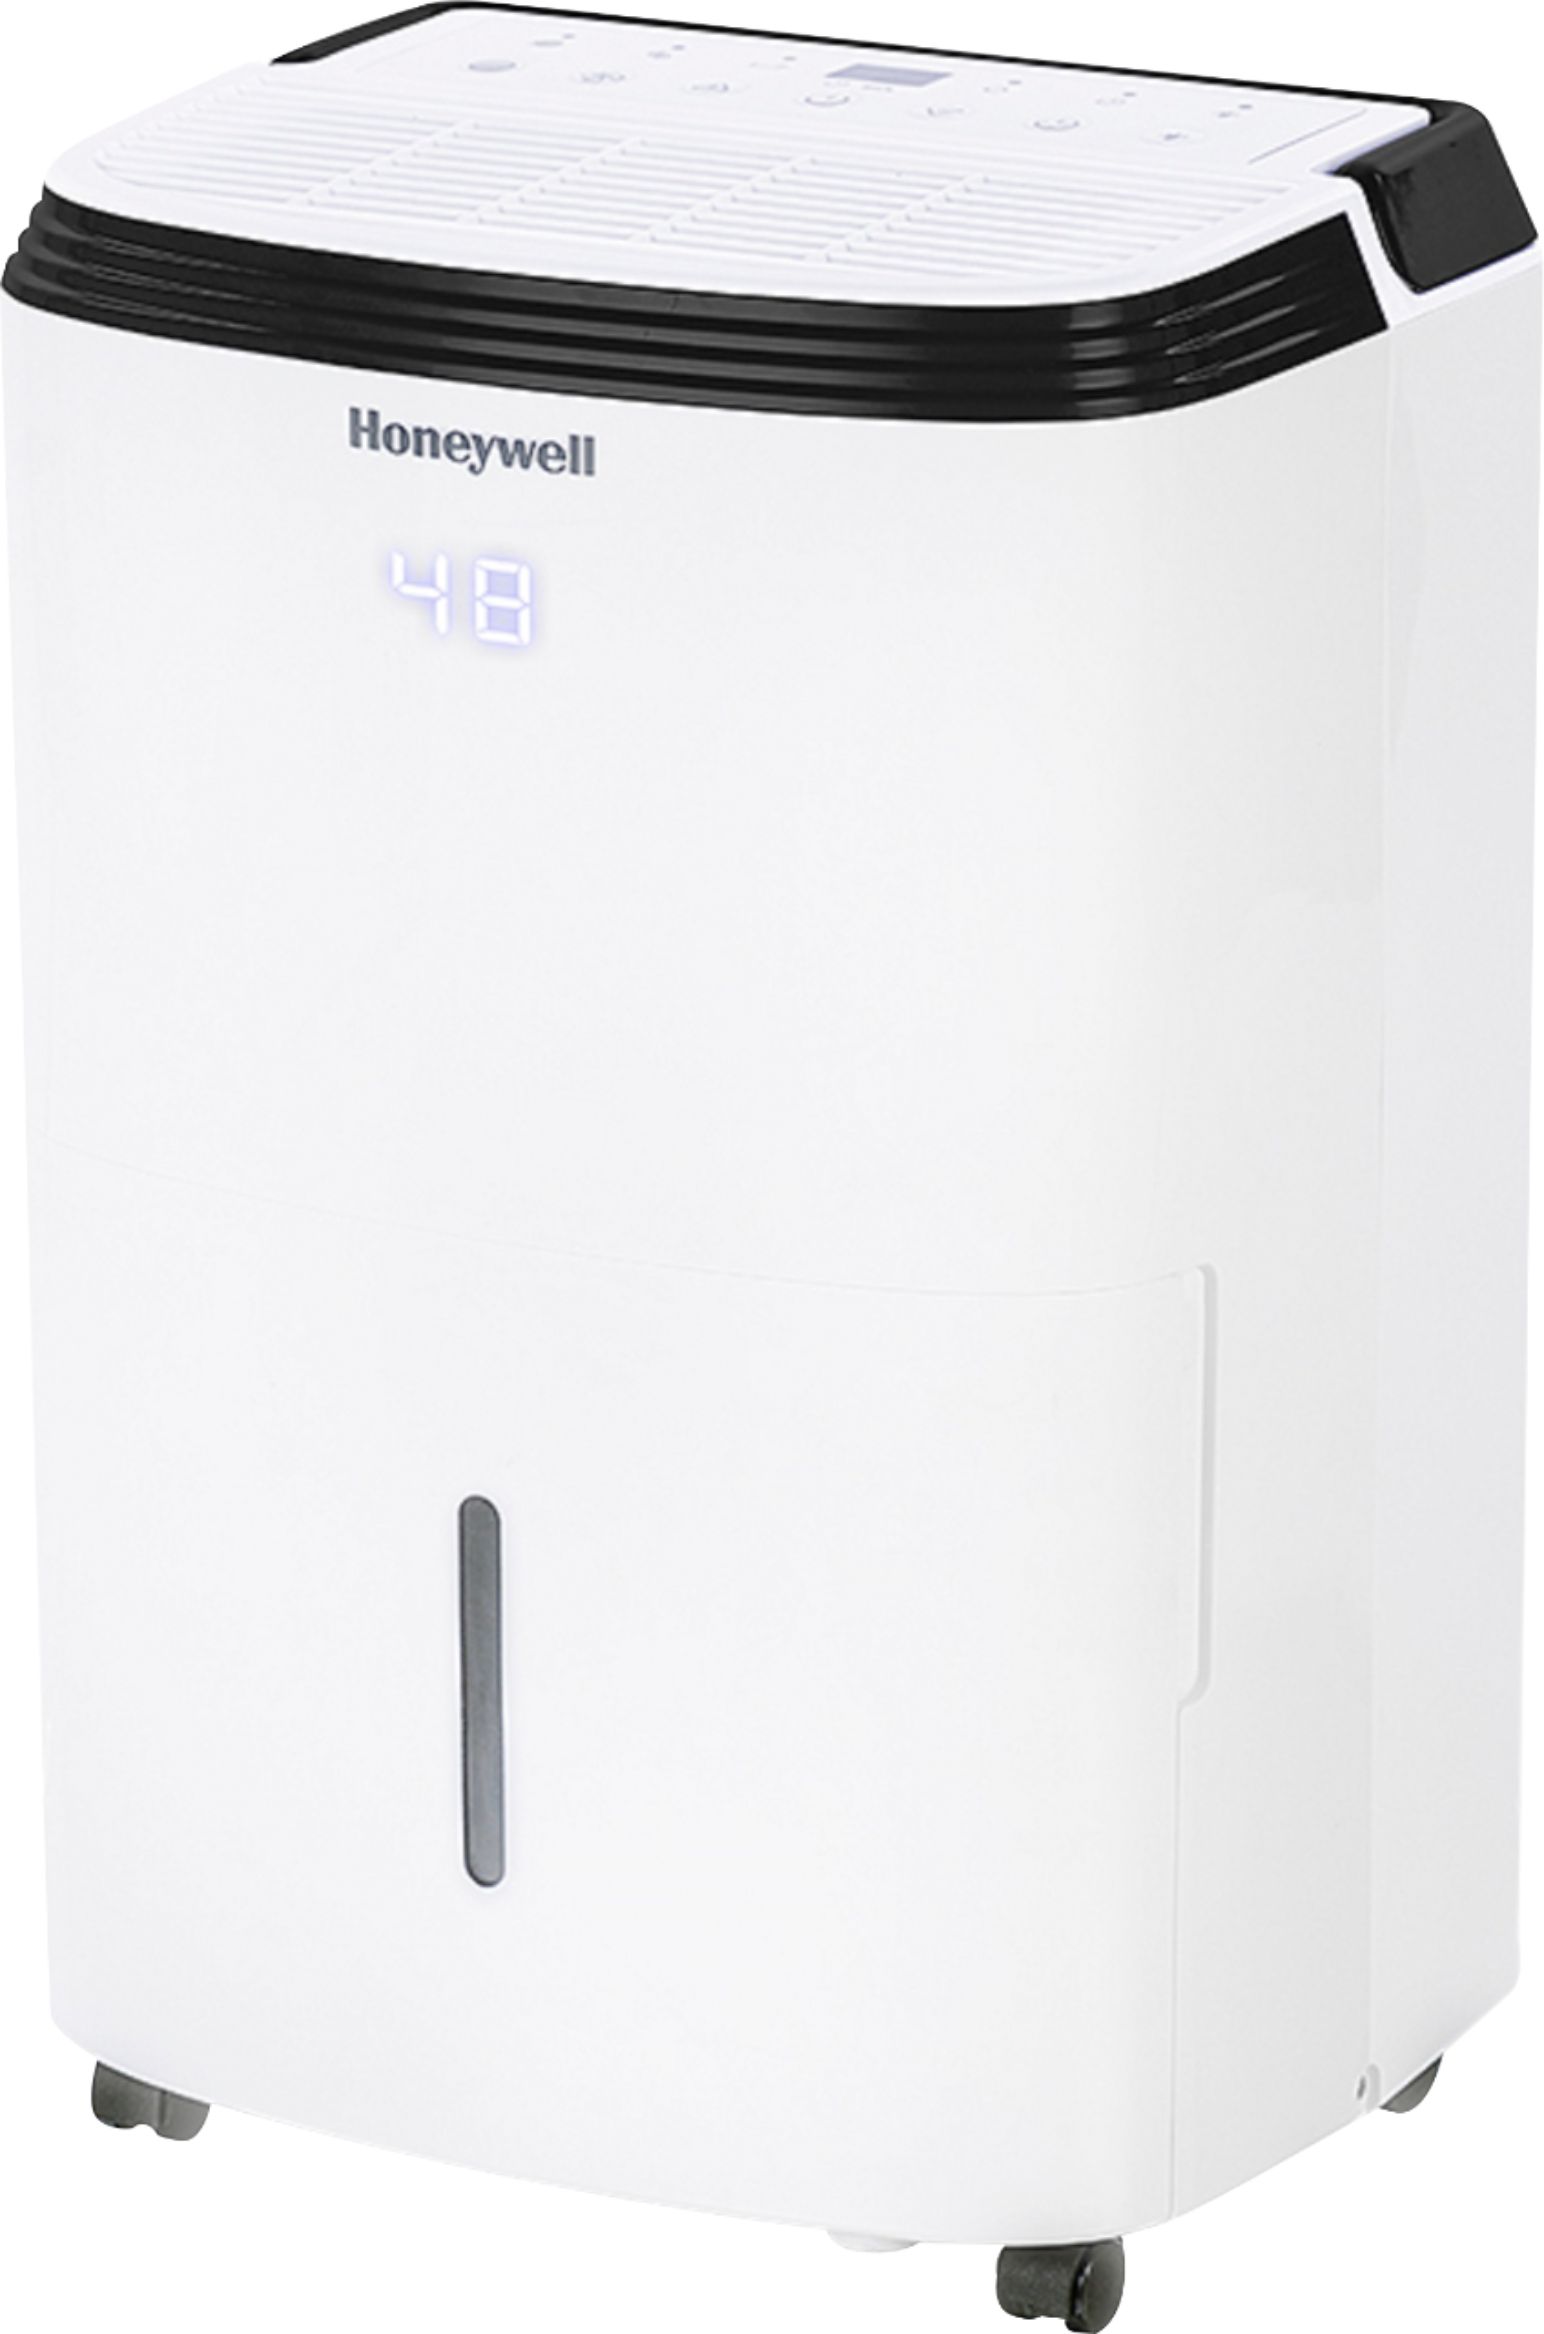 Left View: Honeywell - Energy Star 30-Pint Dehumidifier with Washable Filter - White